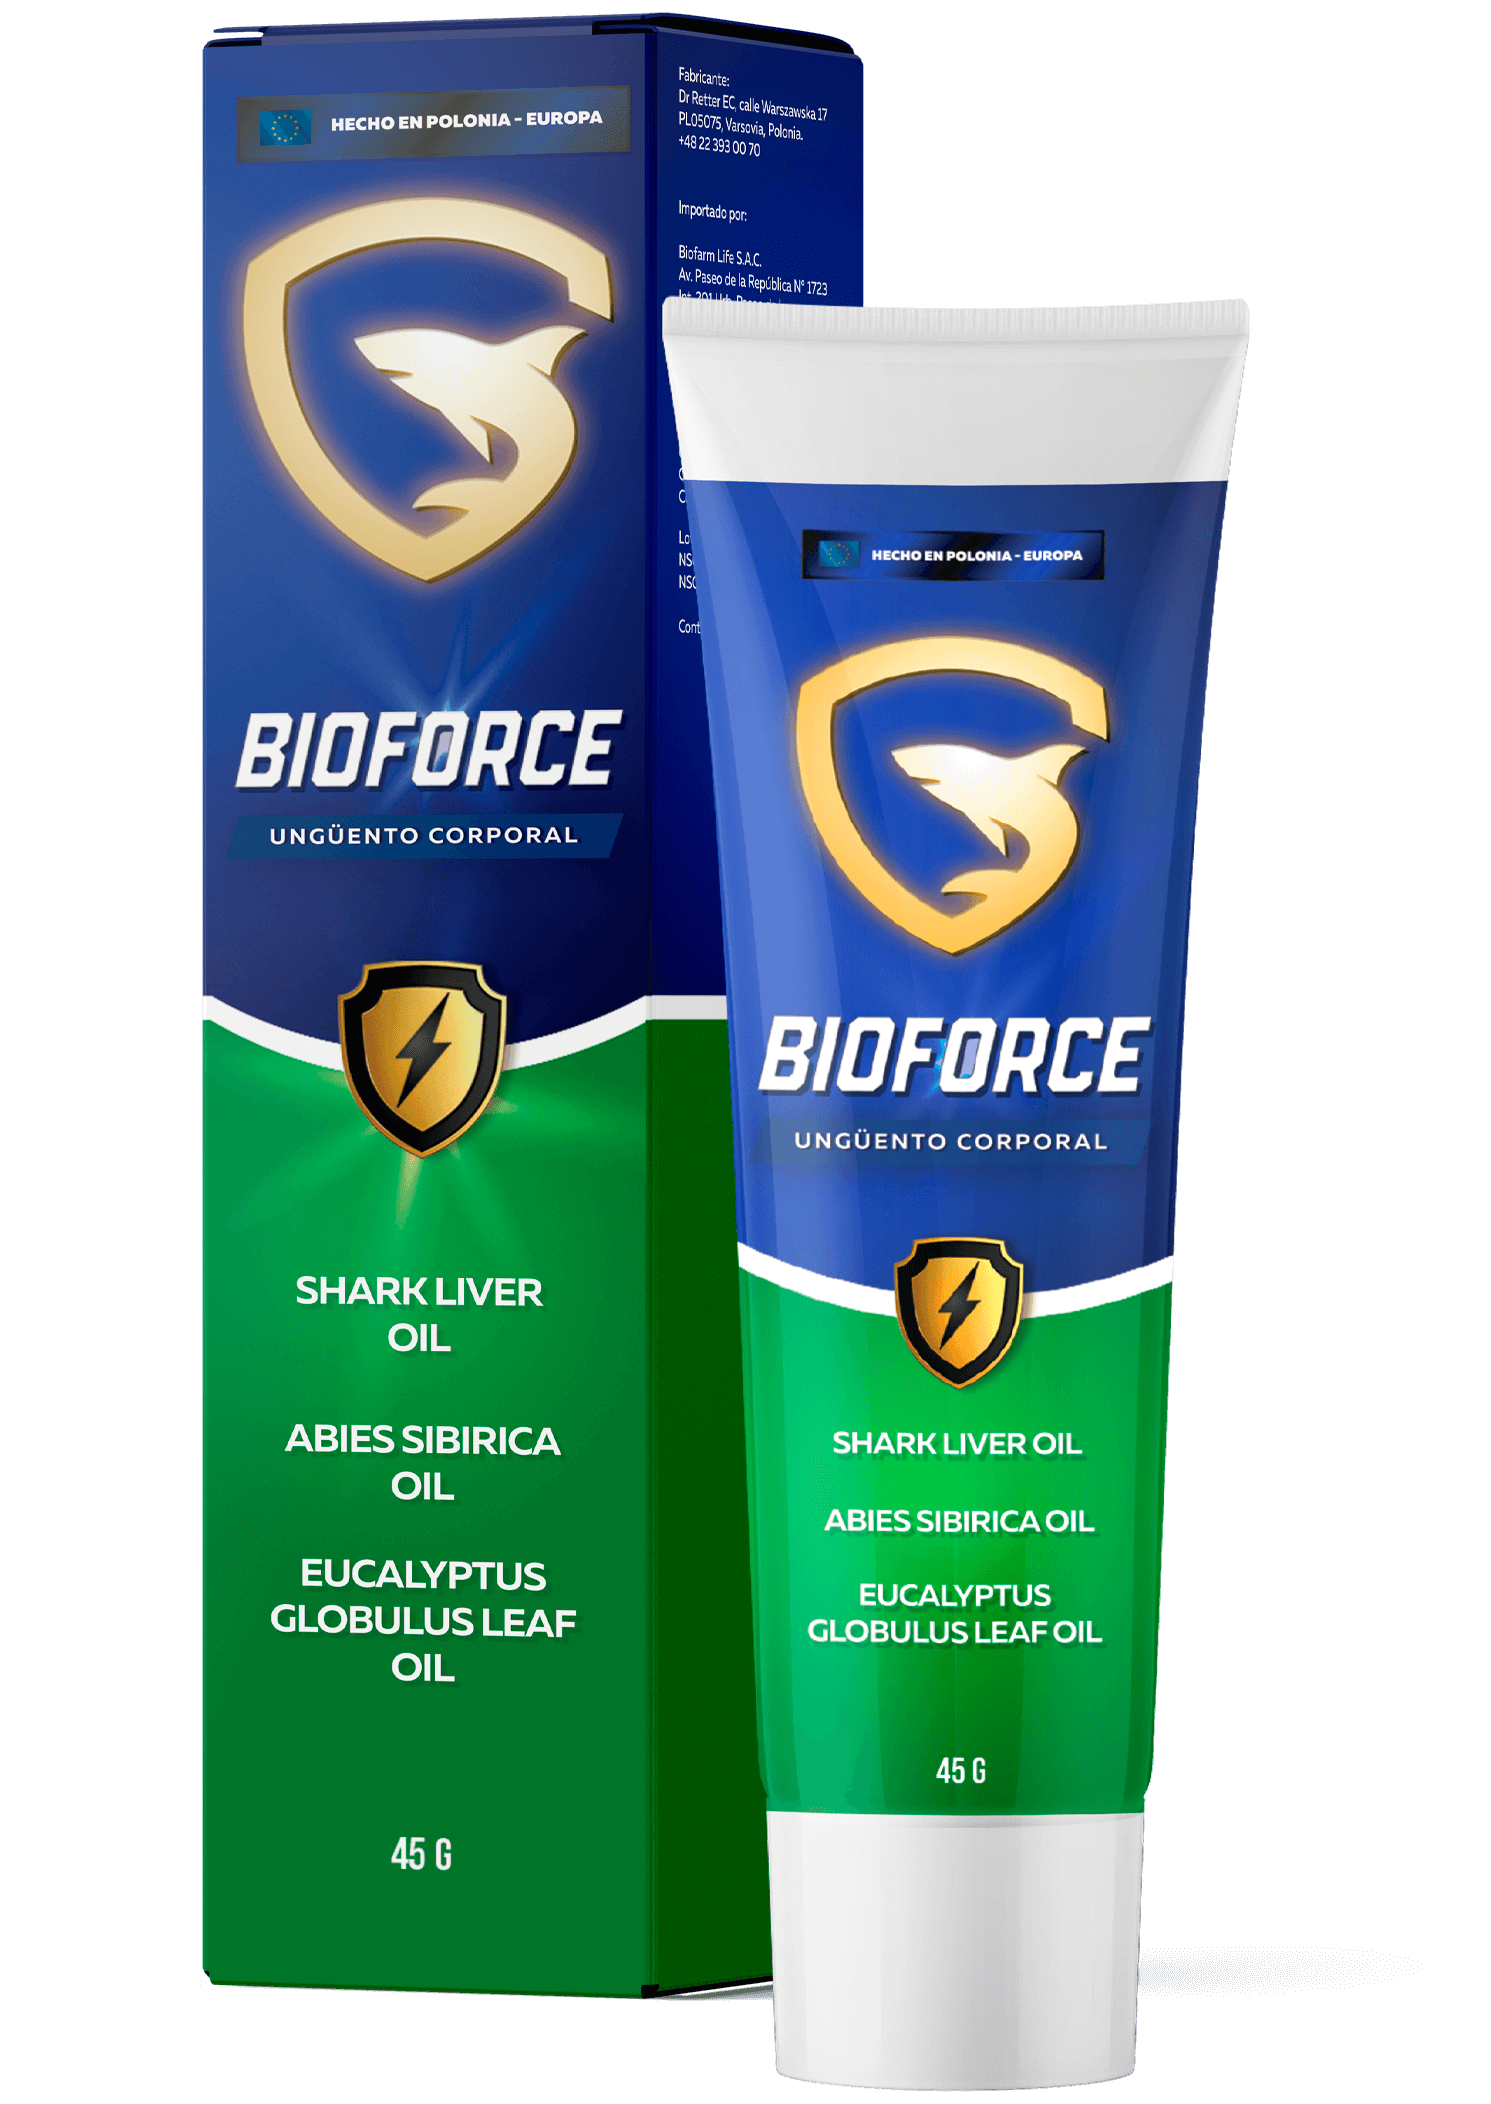 BioForce Product Overview. What Is It?